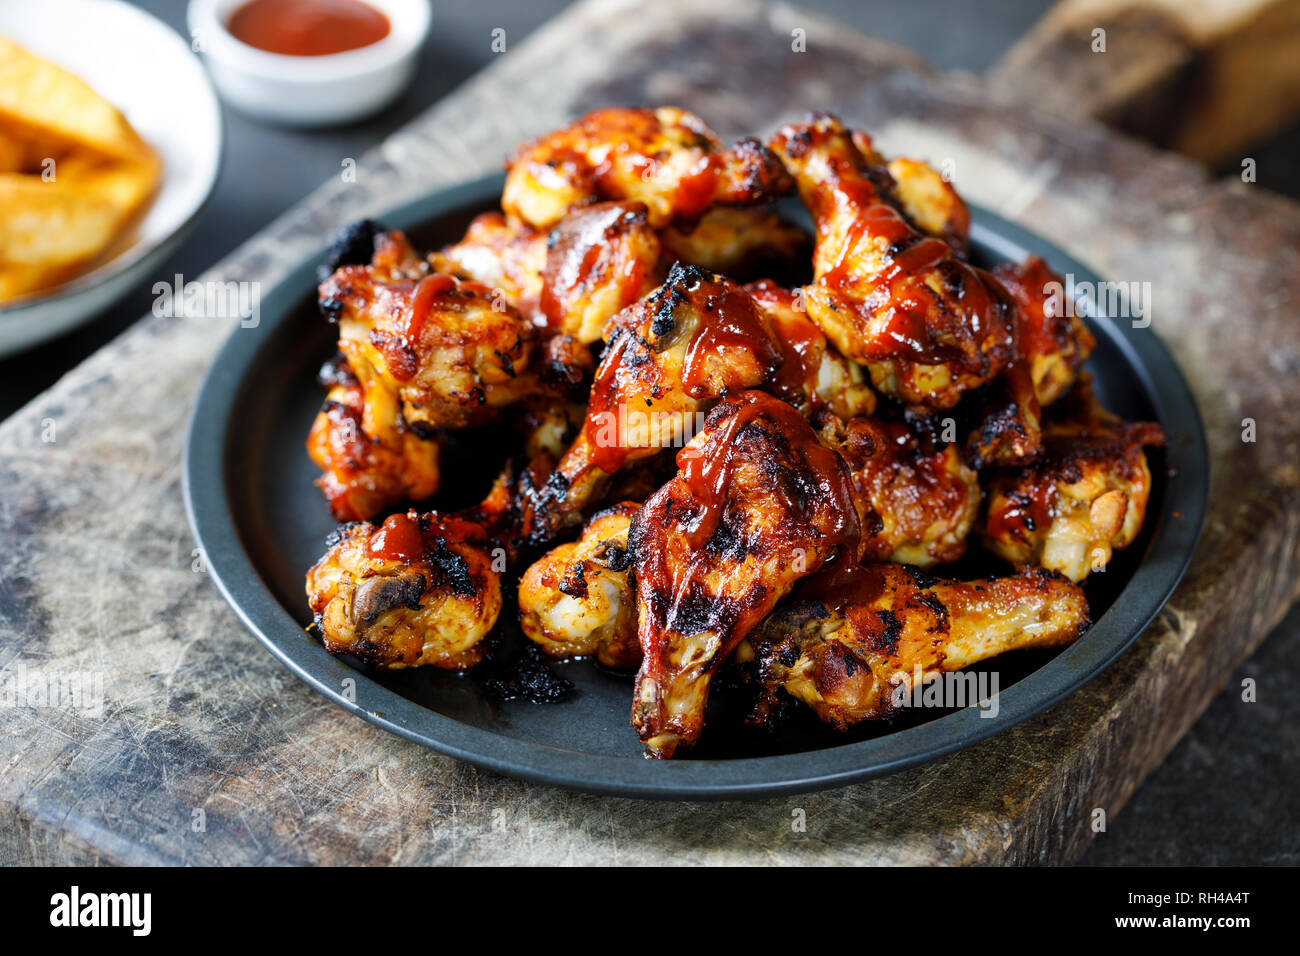 Barbecue chicken wings with sauce Stock Photo